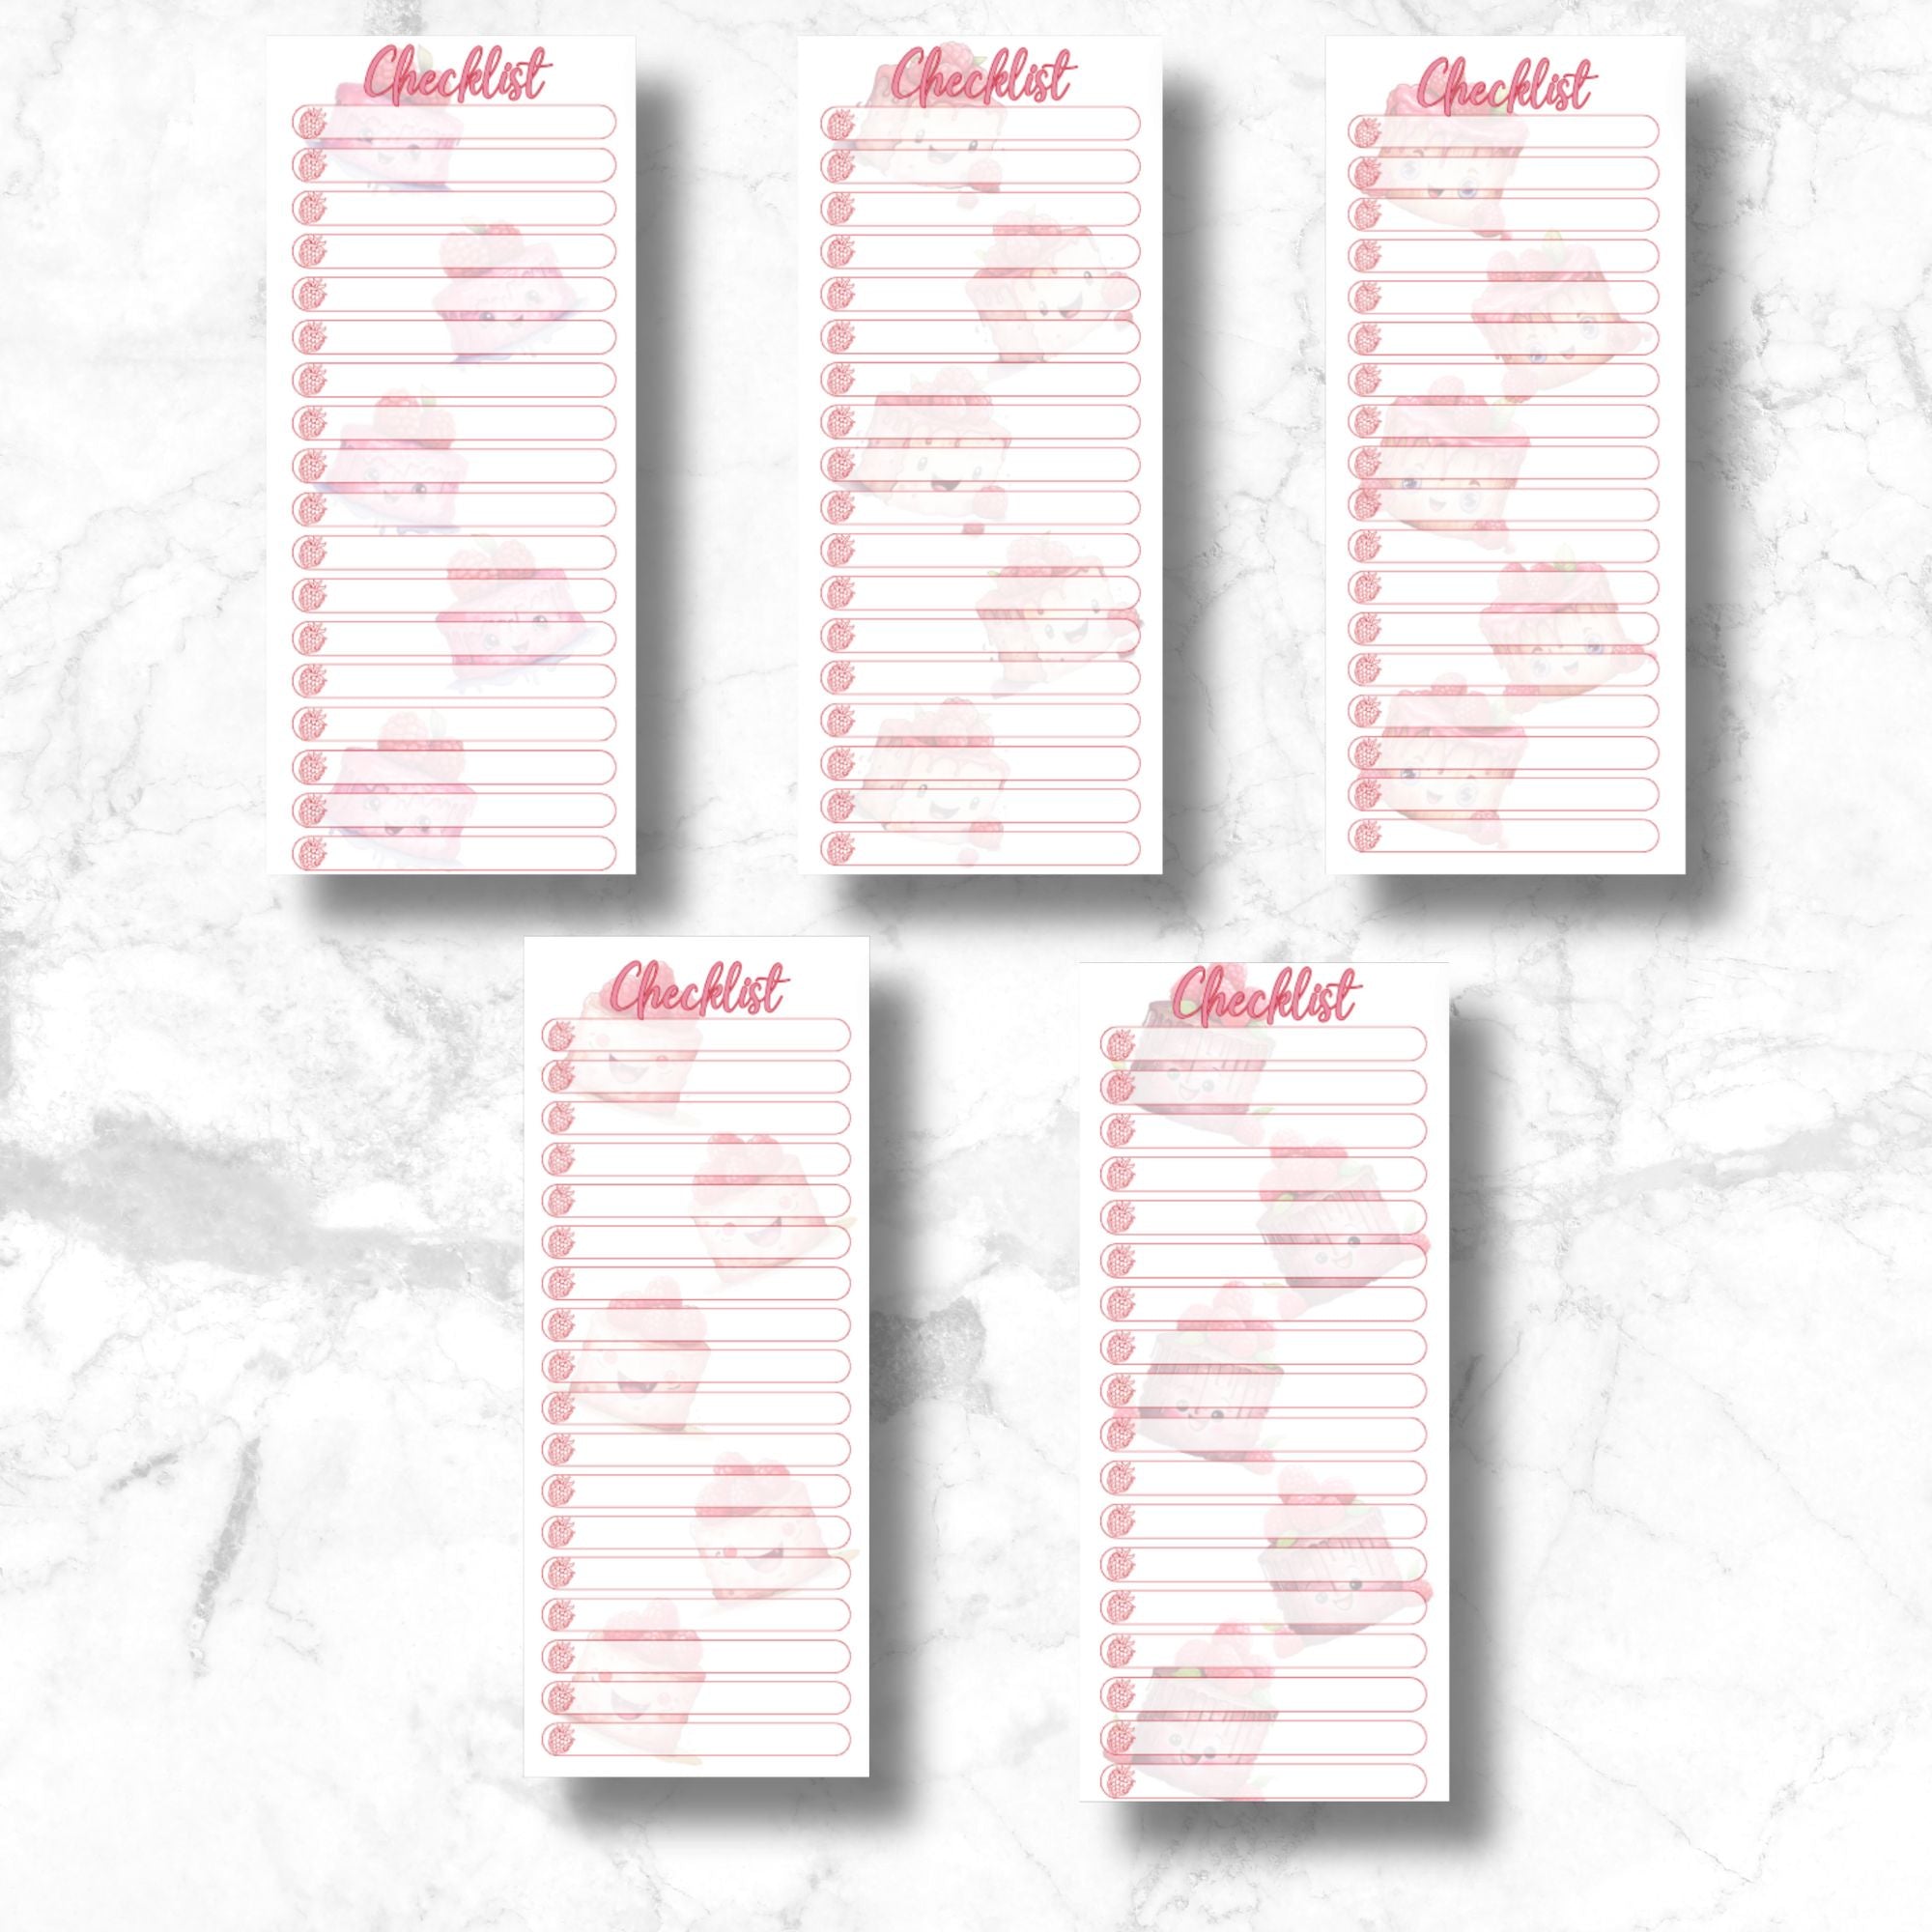 This image show the 5 different designs included in the Checklist Notepad - Raspberry Cakes.